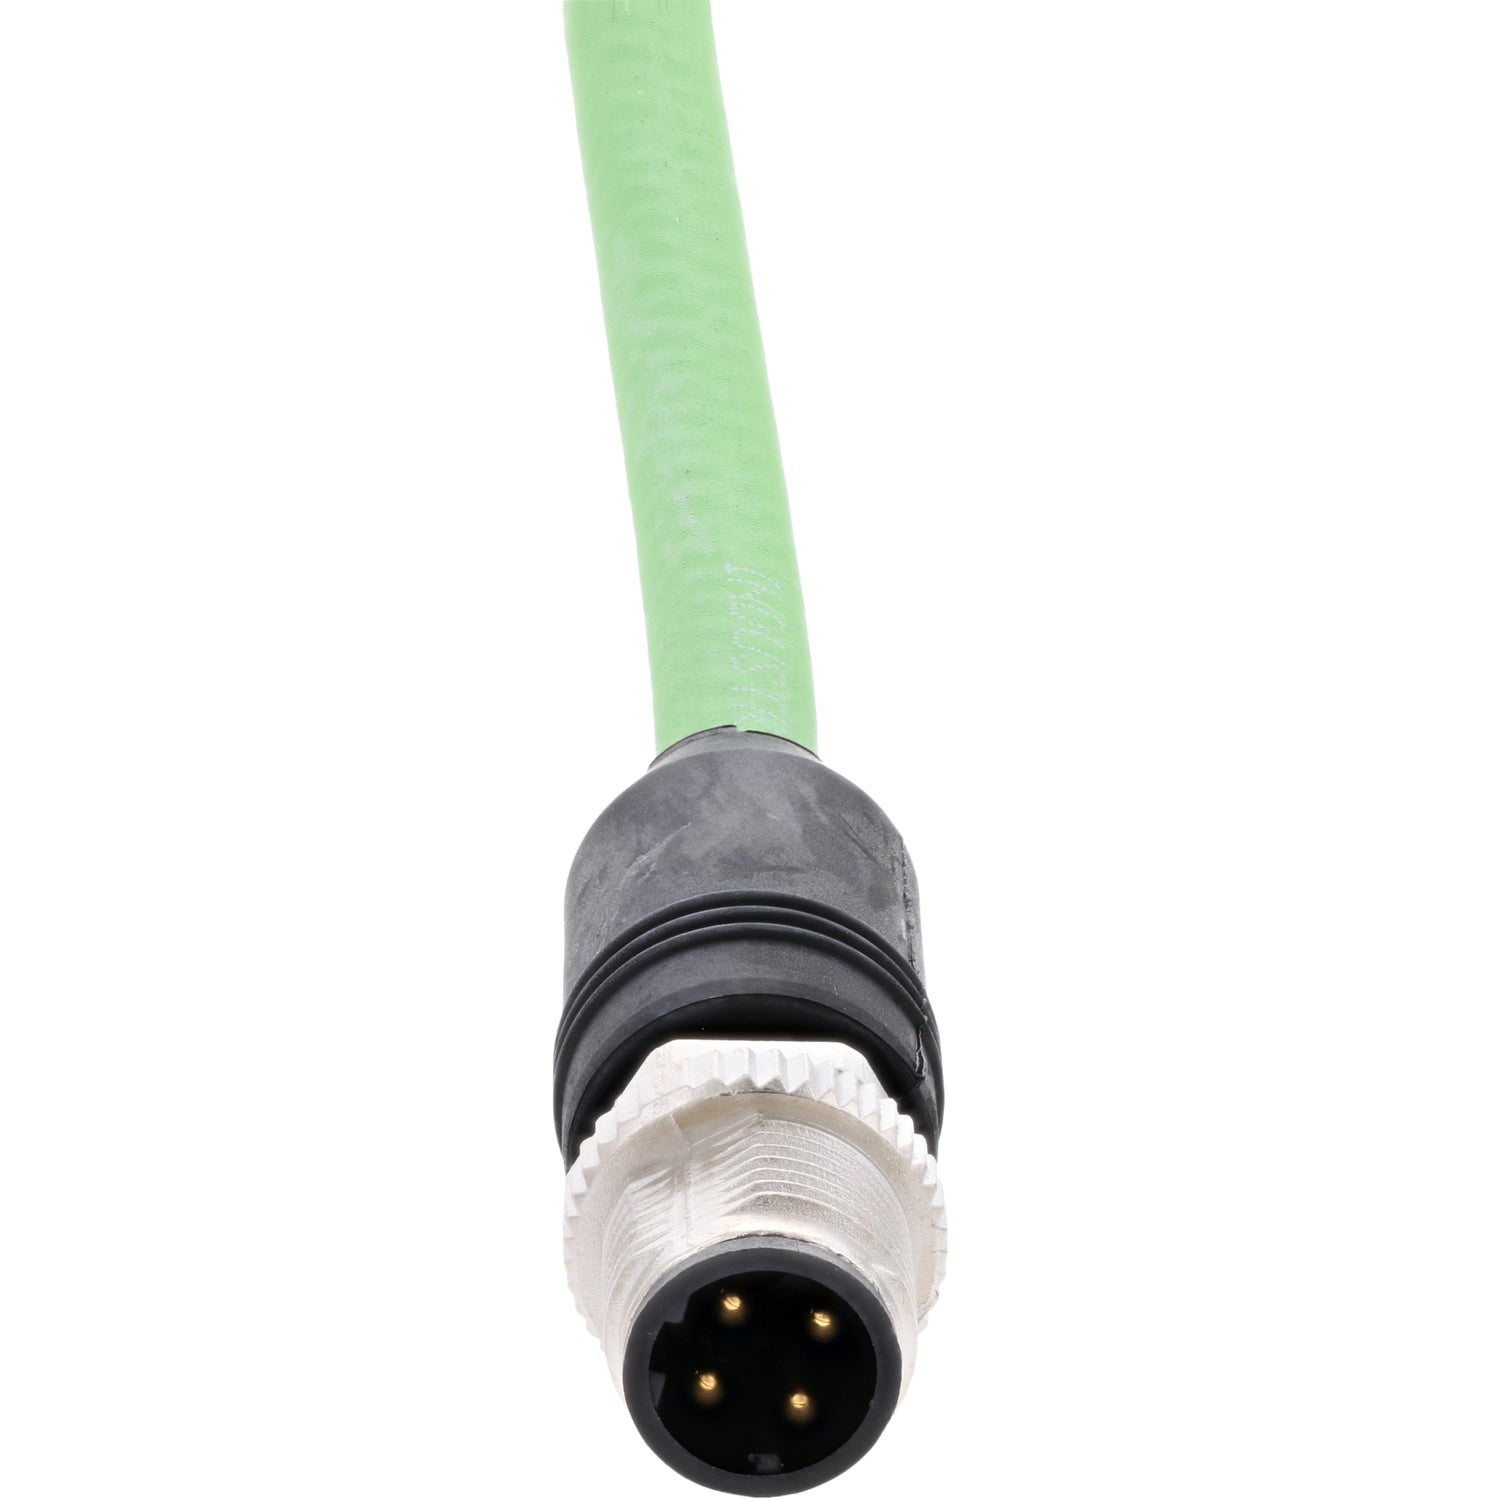 Green connecting cable with nickel-plated four-pin male connector on white background. 